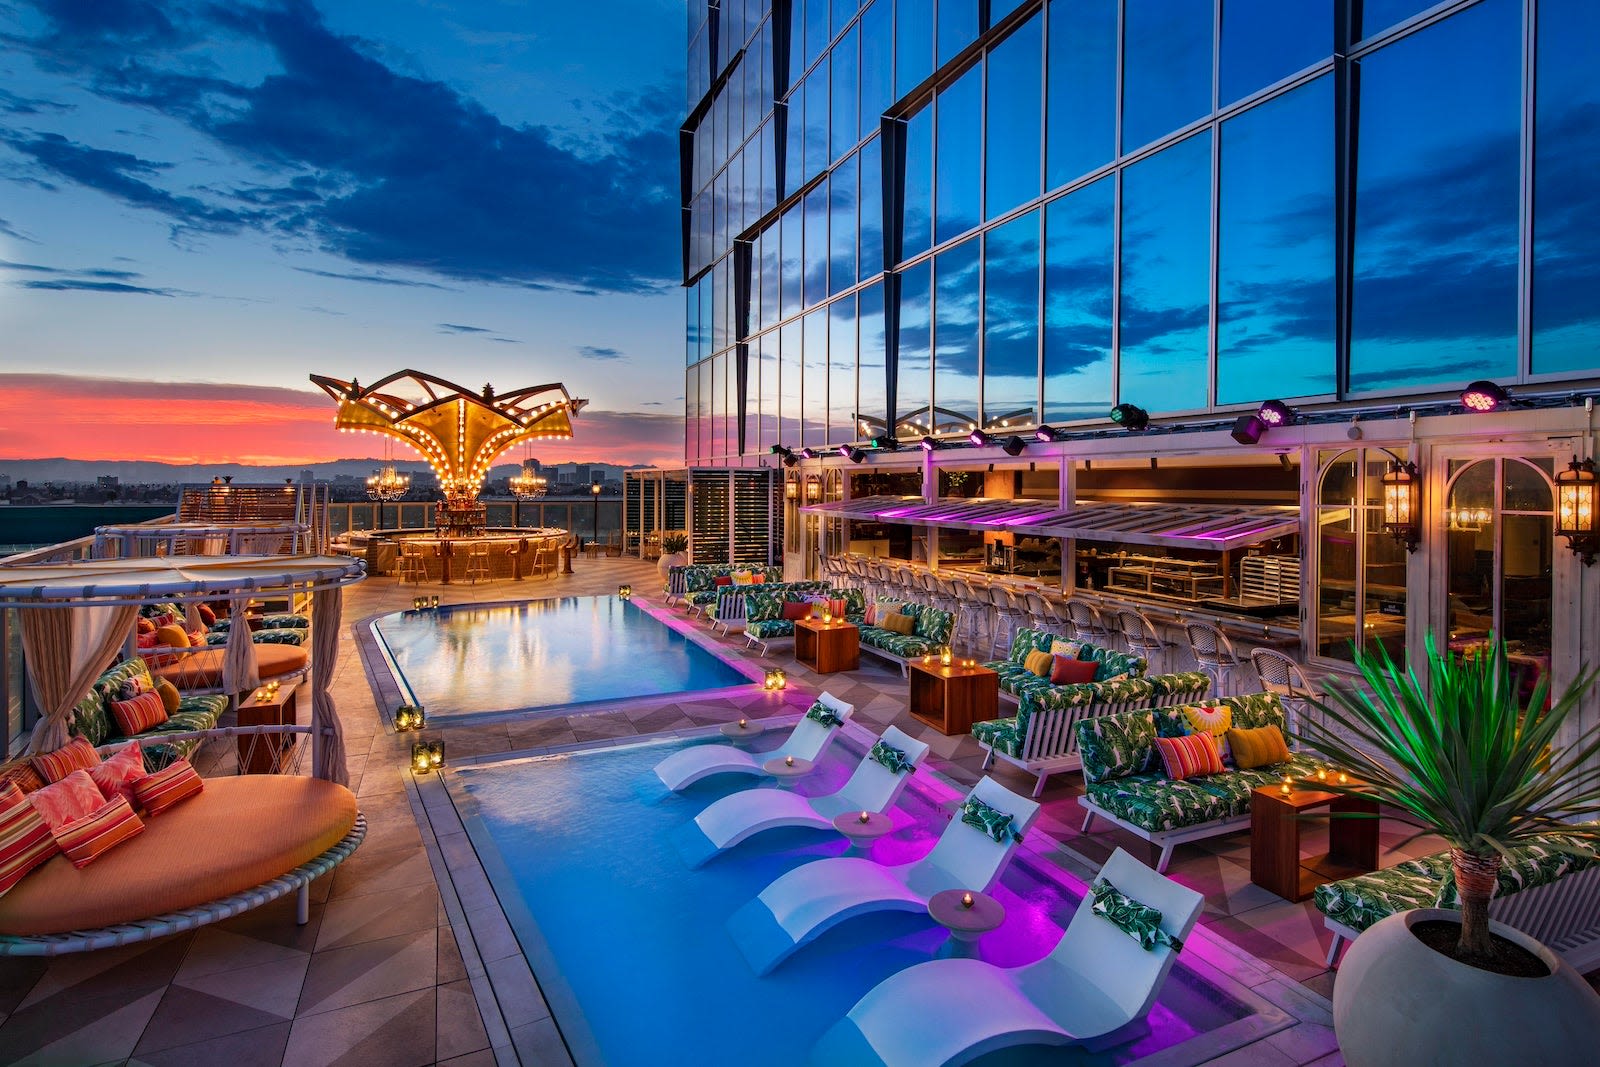 11 best hotels for nightlife — from popular nightclubs to swanky lounges - The Points Guy